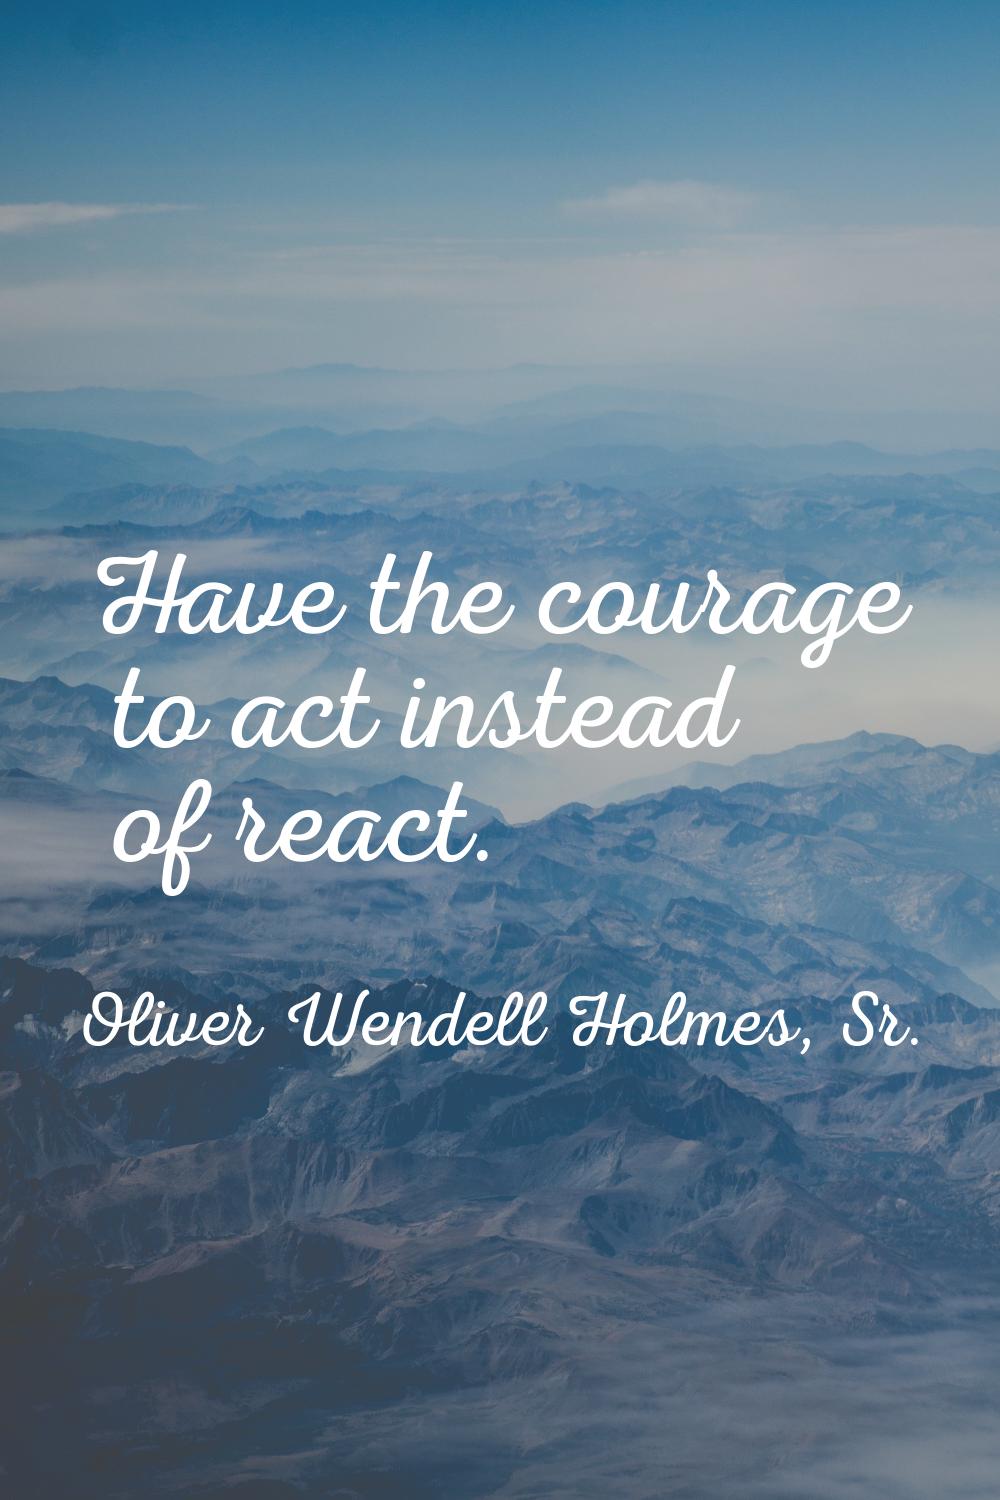 Have the courage to act instead of react.